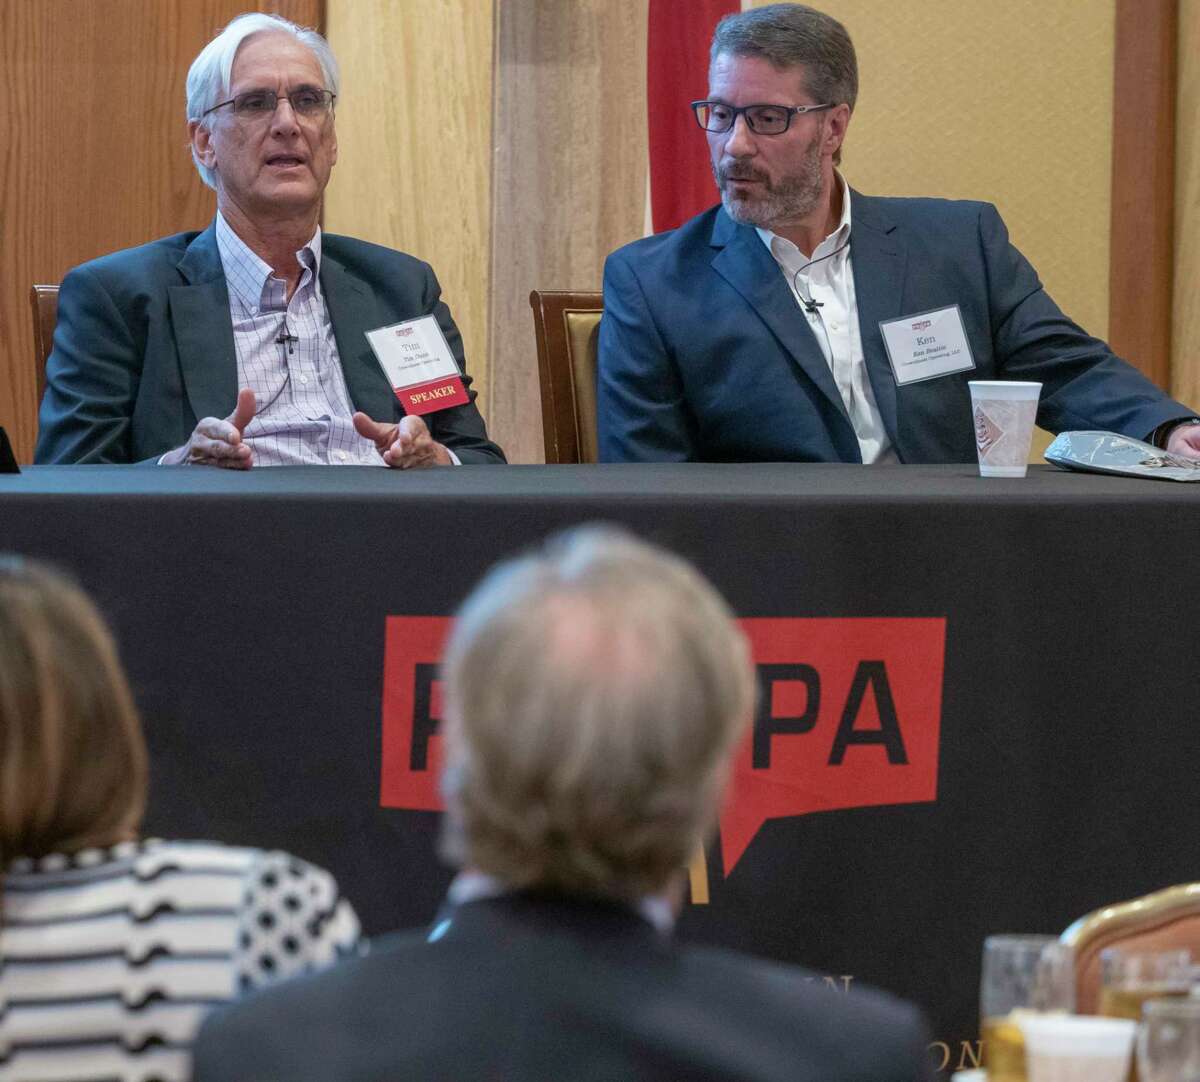 Panel discussion with CrownQuest Operating executives, Tim Dunn, CEO and Ken Beattie at the 59th Annual Meeting of the Permian Basin Petroleum Association 09/30/2021 at the Petroleum Club. Tim Fischer/Reporter-Telegram